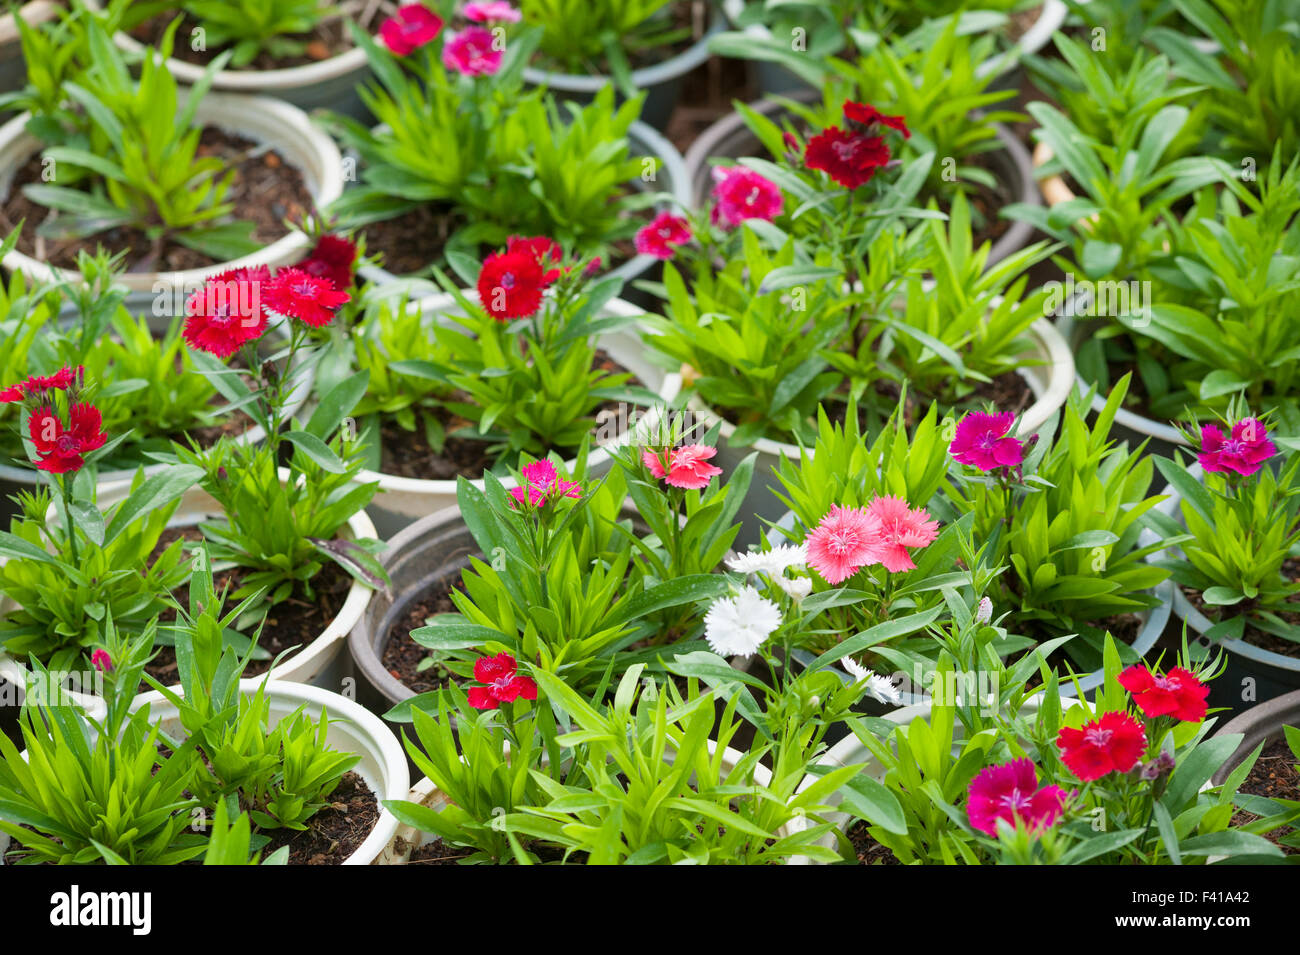 a lot of red flower plants in pots Stock Photo